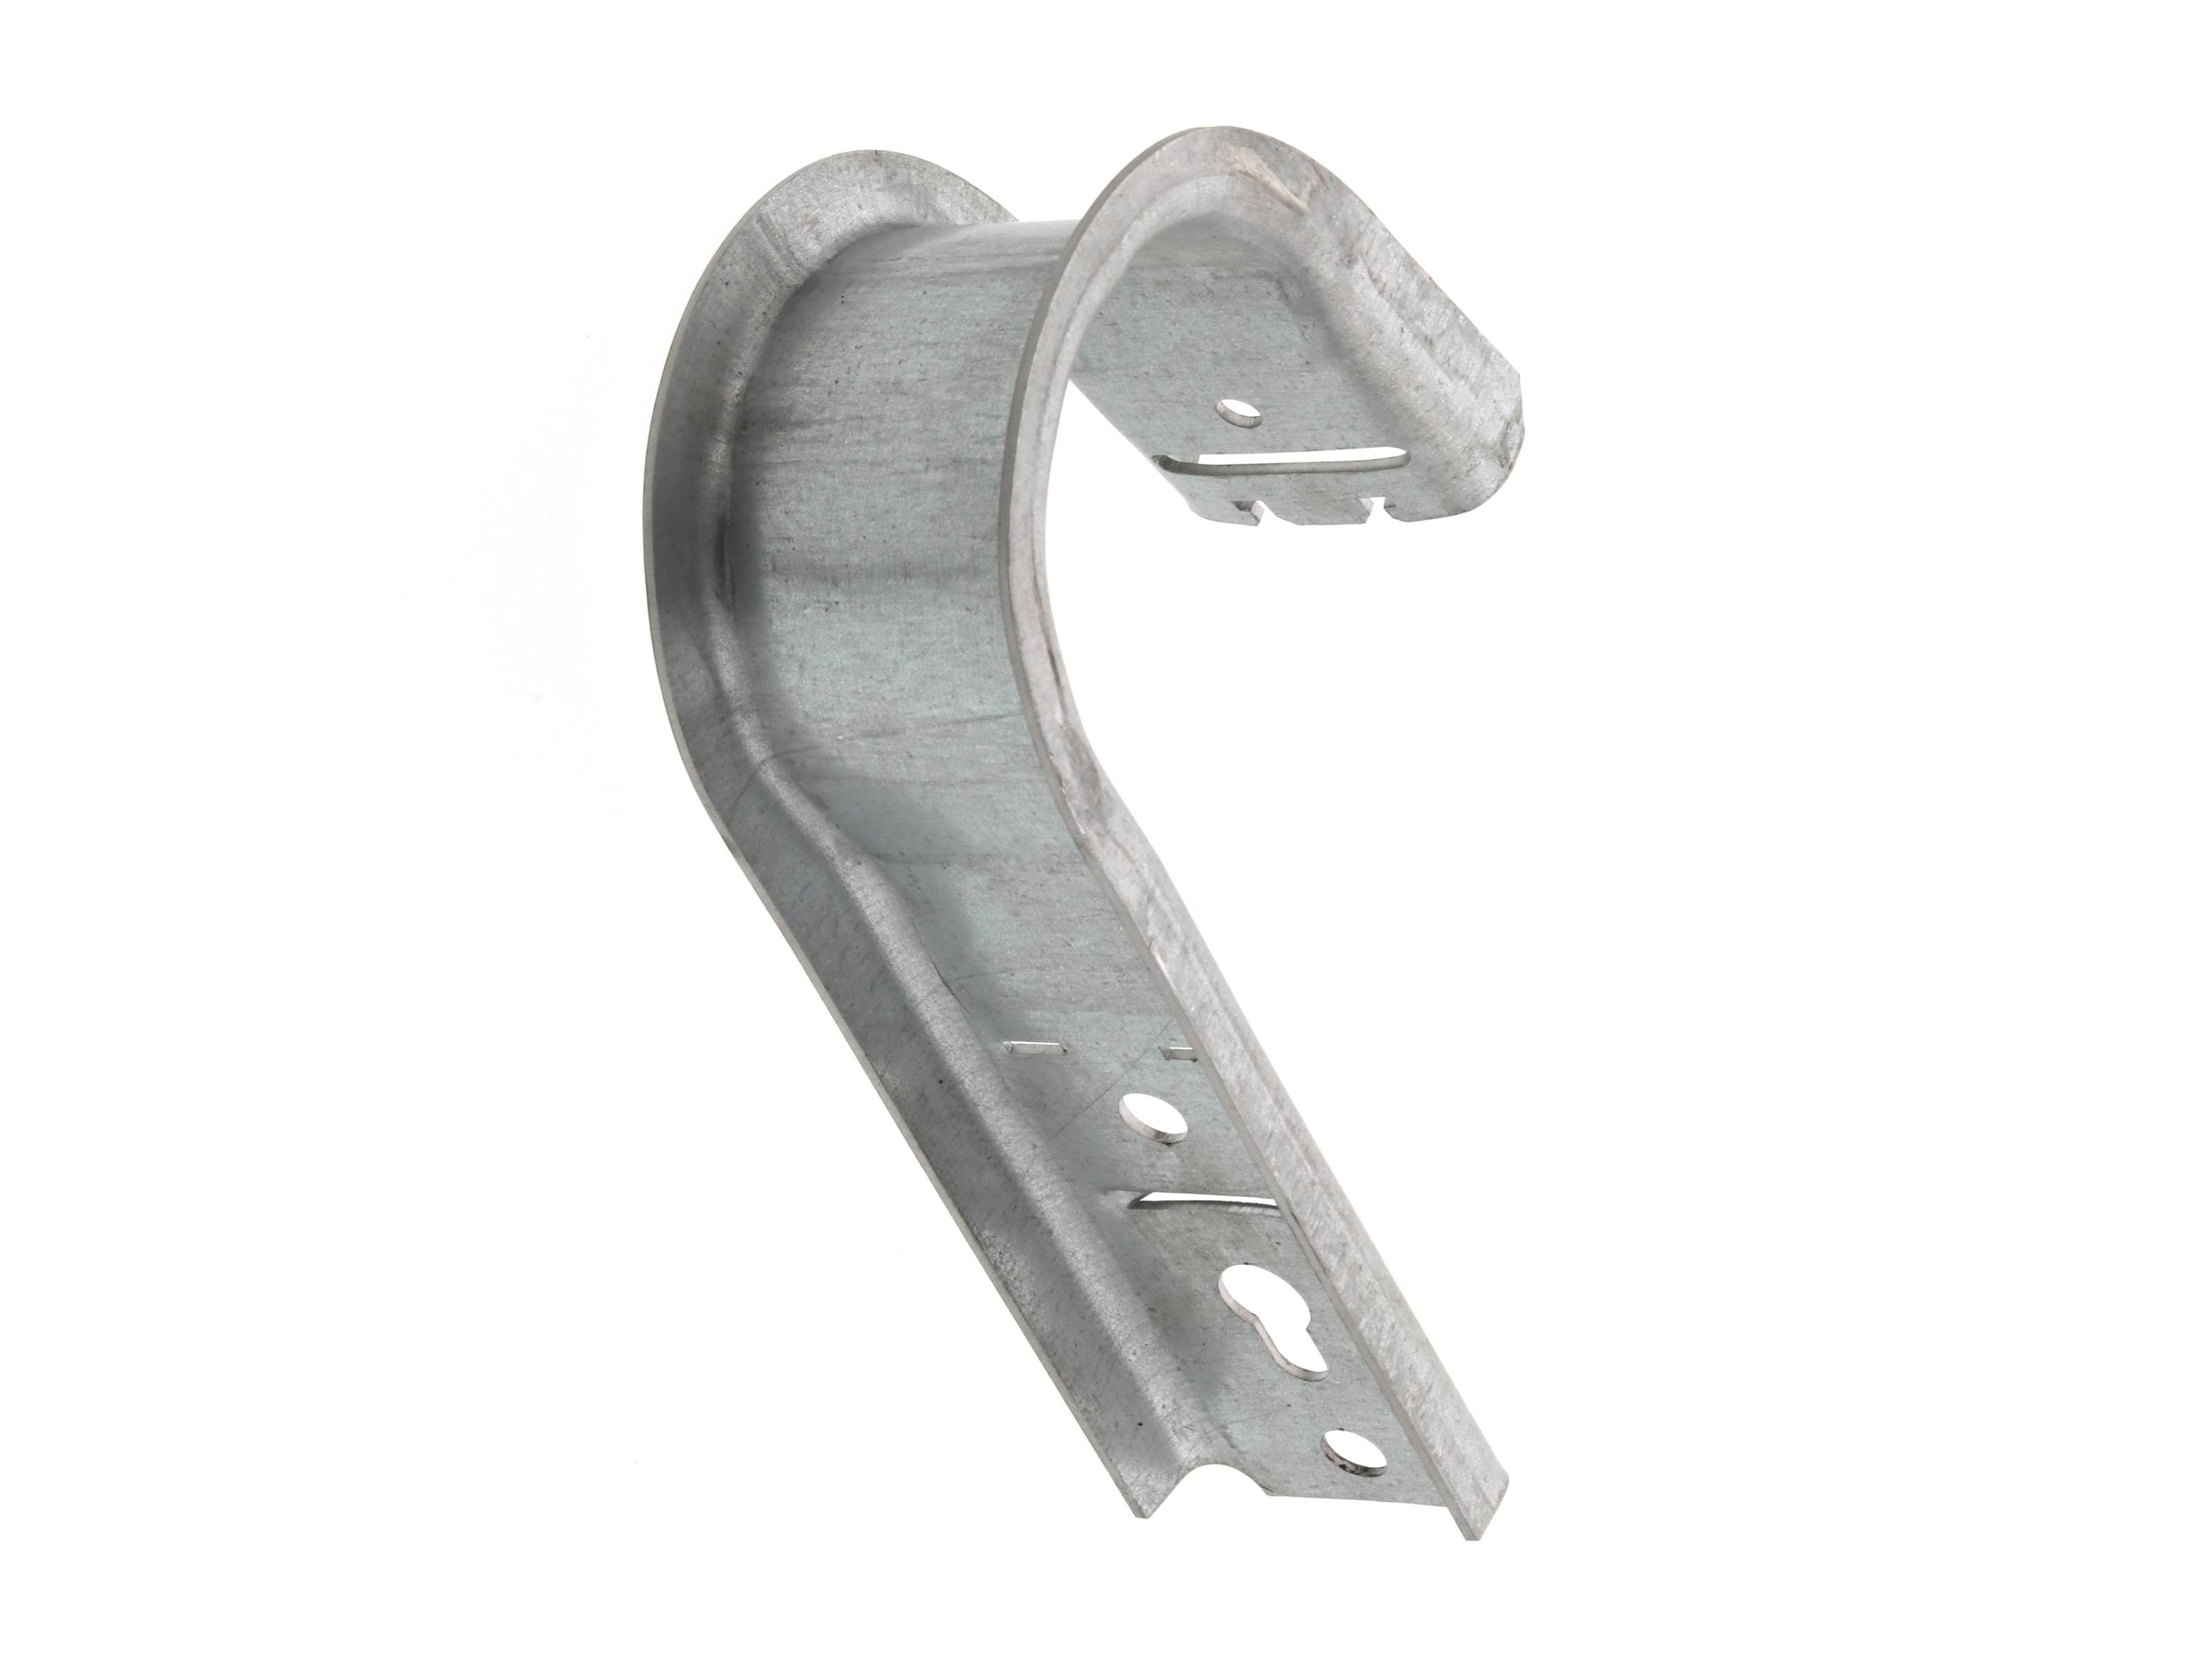 2 Inch J-Hook - Standard Mount, Galvanized, 25 Pack at Cables N More